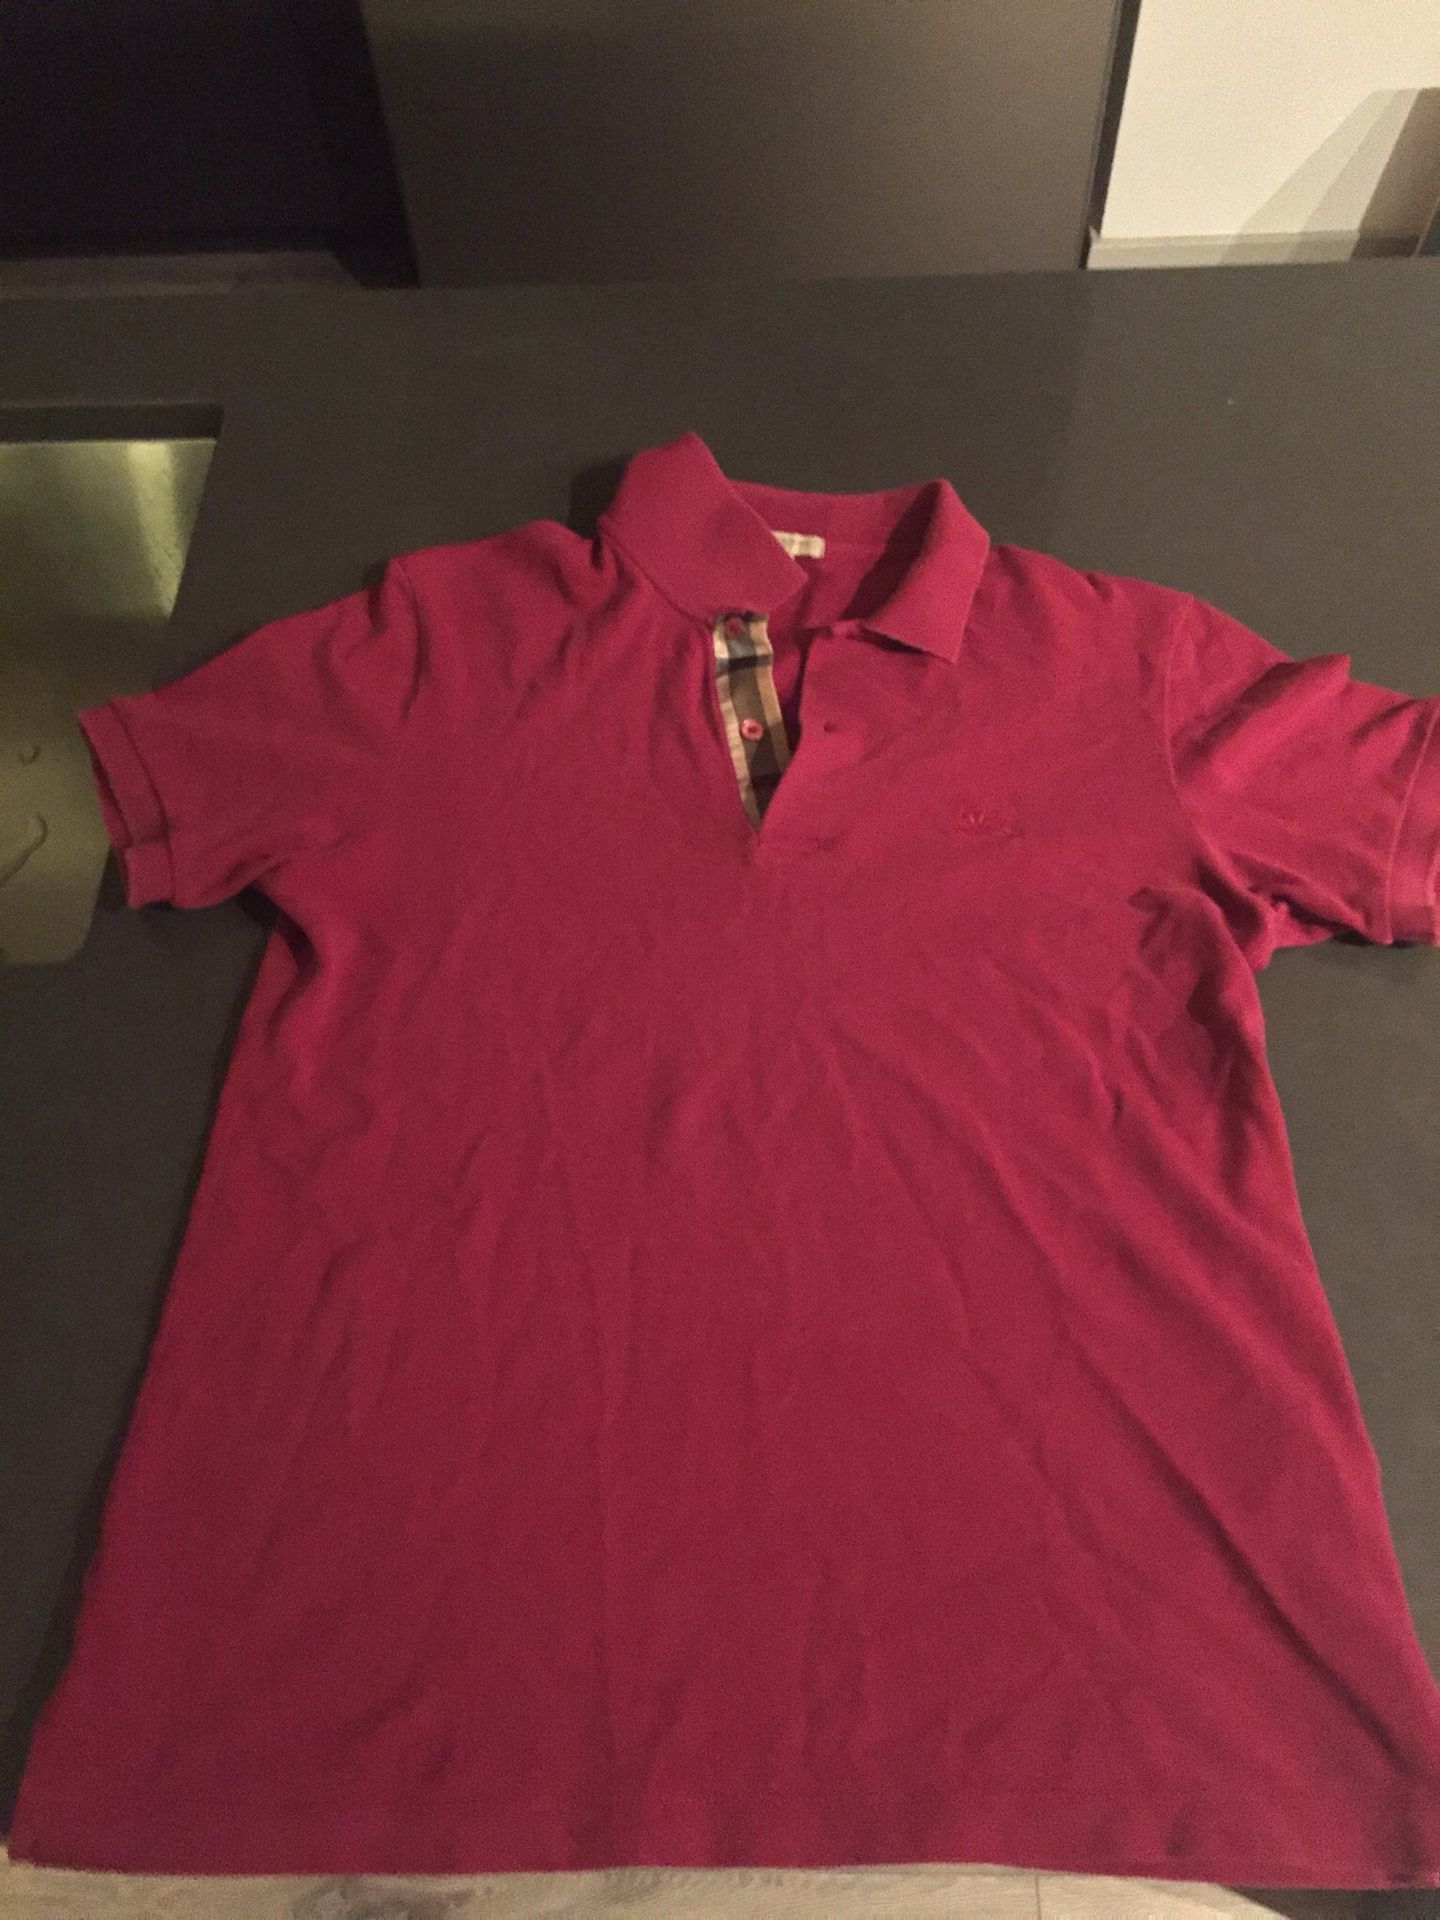 Burberry Polo Size Small Pick up only $15